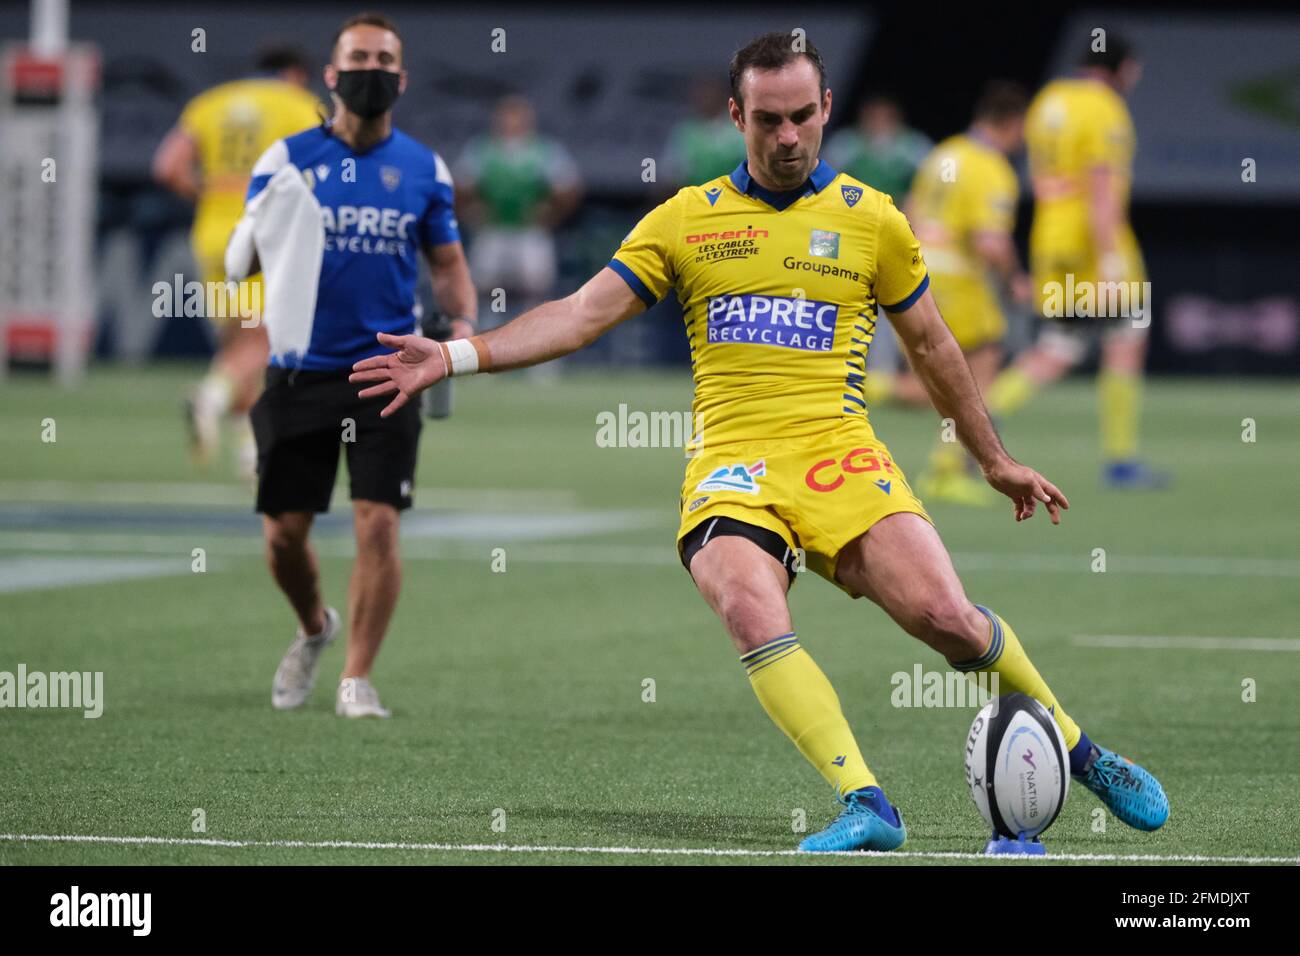 Nanterre, Hauts de Seine, France. 8th May, 2021. Clermont Scrum half MORGAN  PARRA in action during the French rugby Championship Top 14 between Racing  92 and Clermont at Paris La Defense Arena